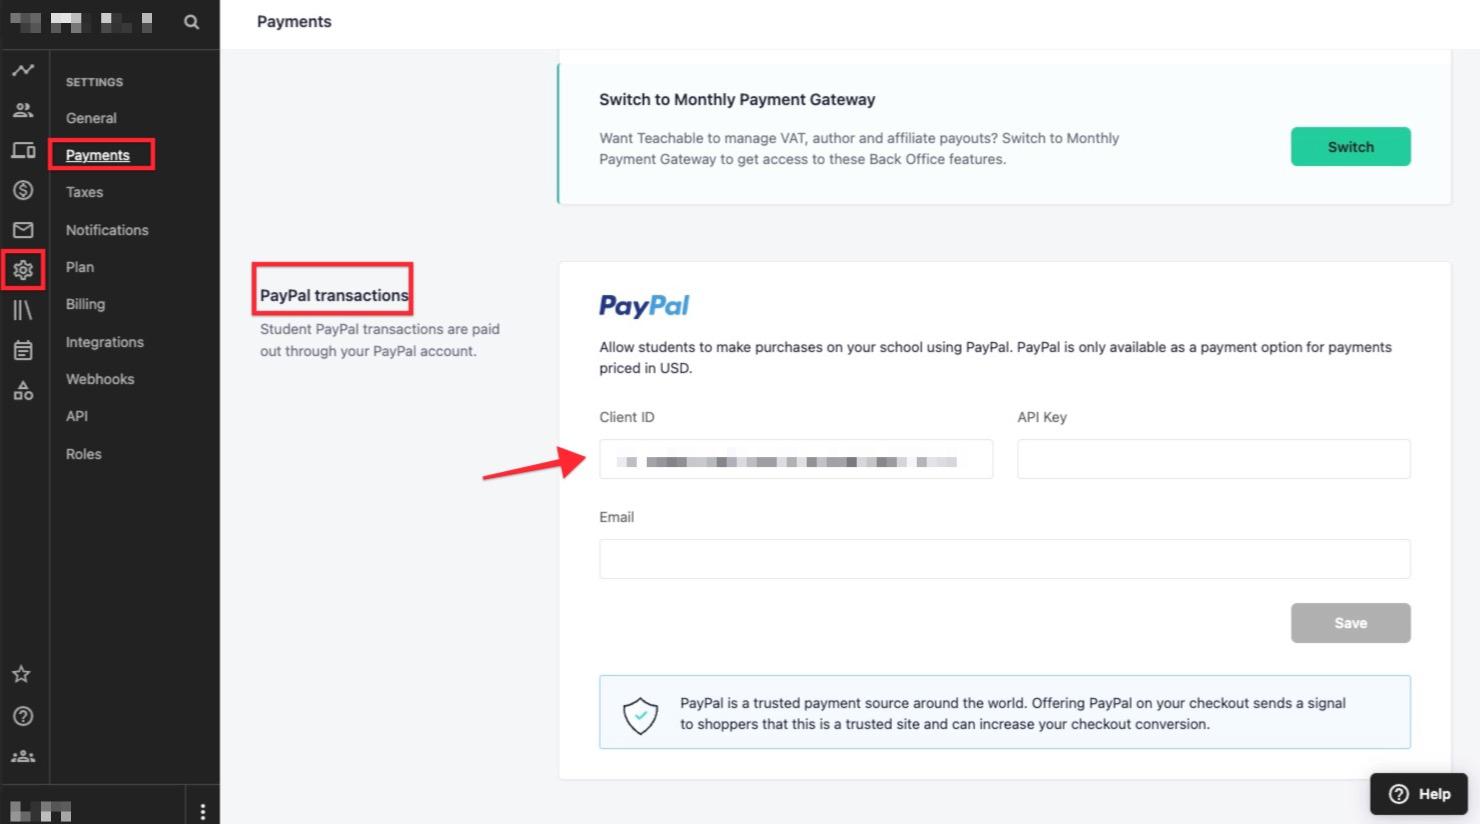 PayPal transactions